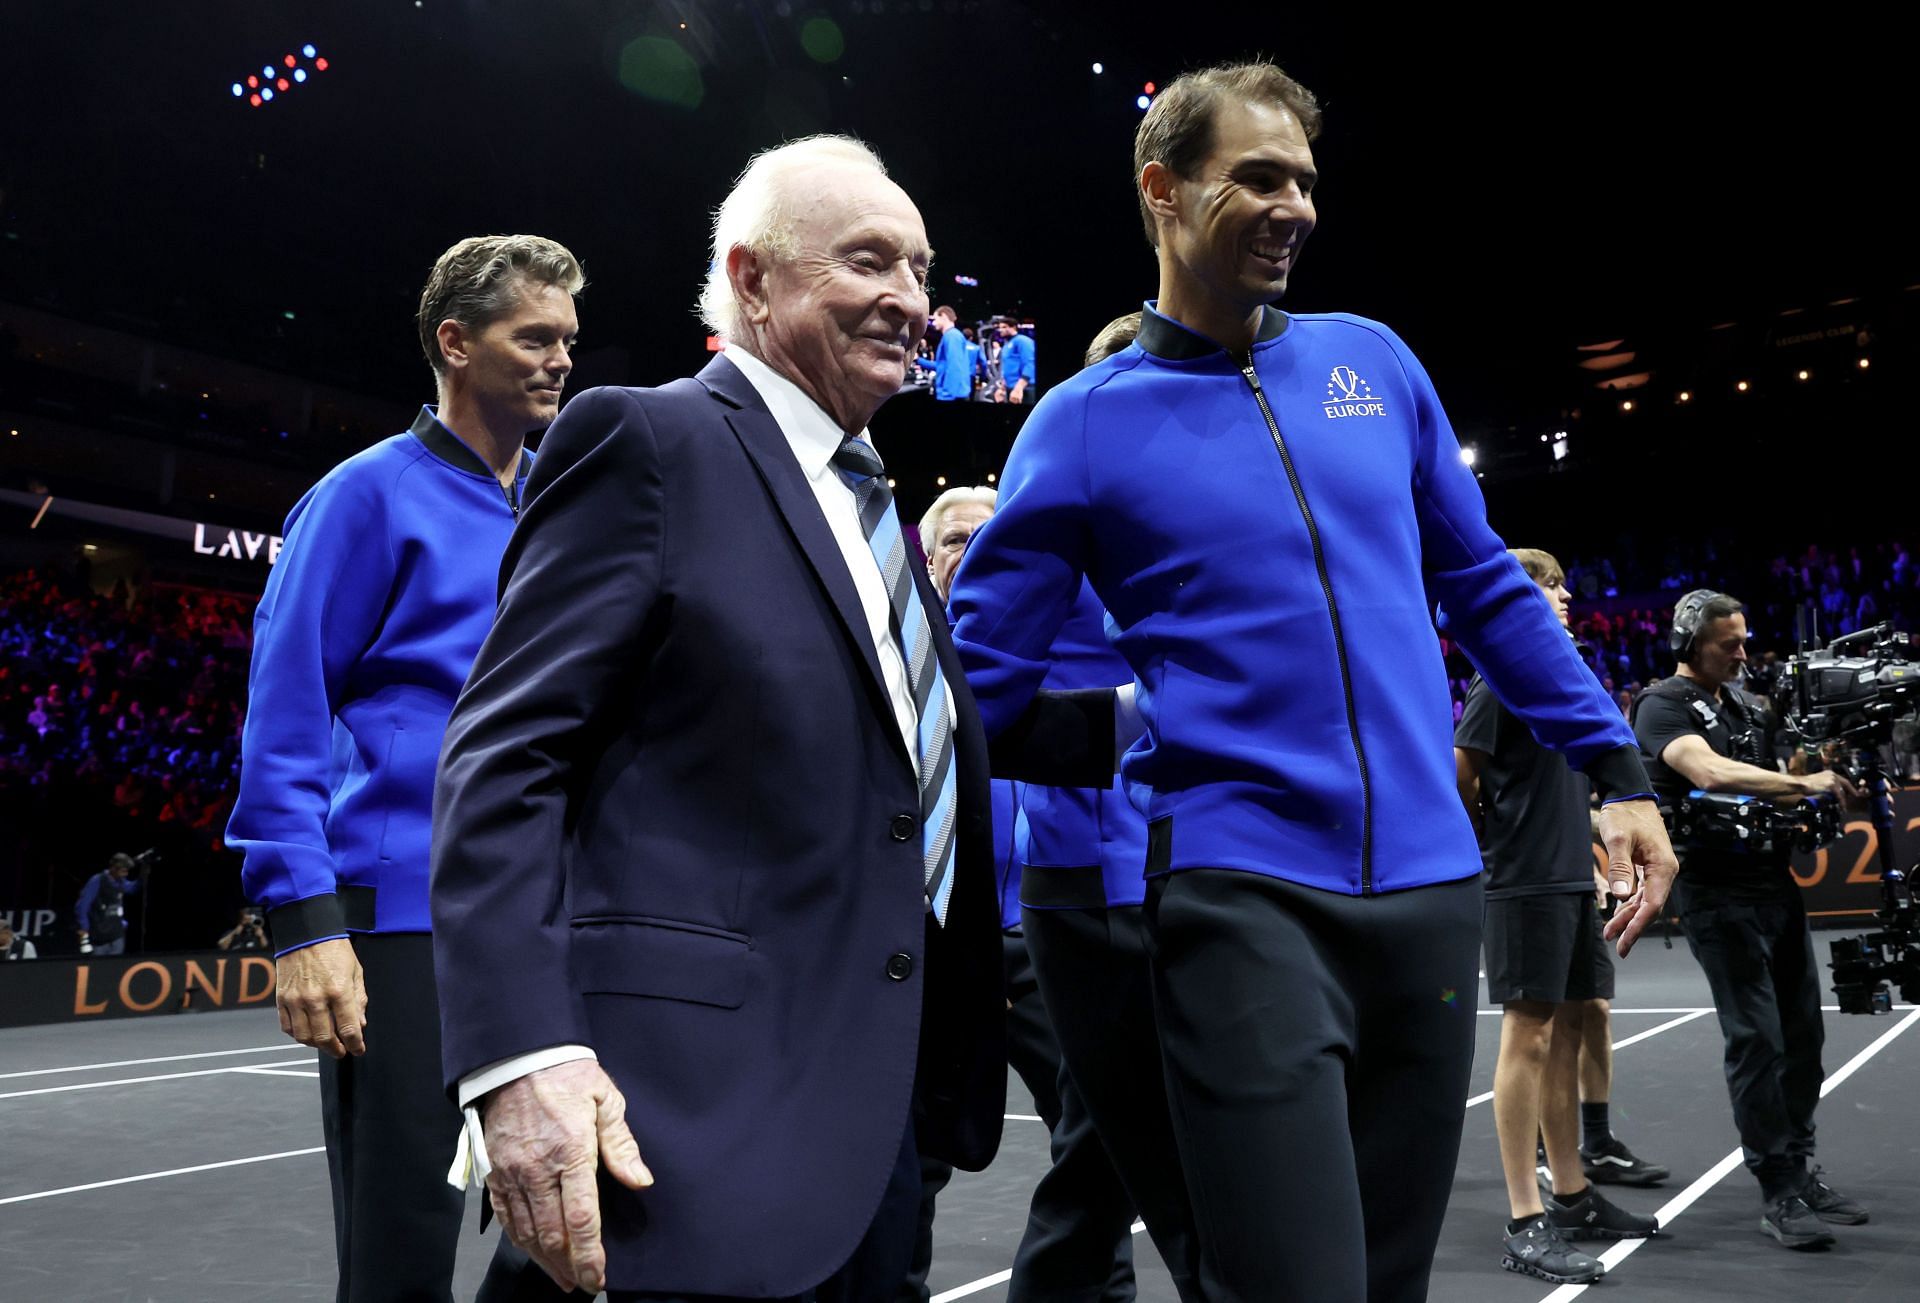 Rafael Nadal and Rod Laver at the 2022 Laver Cup